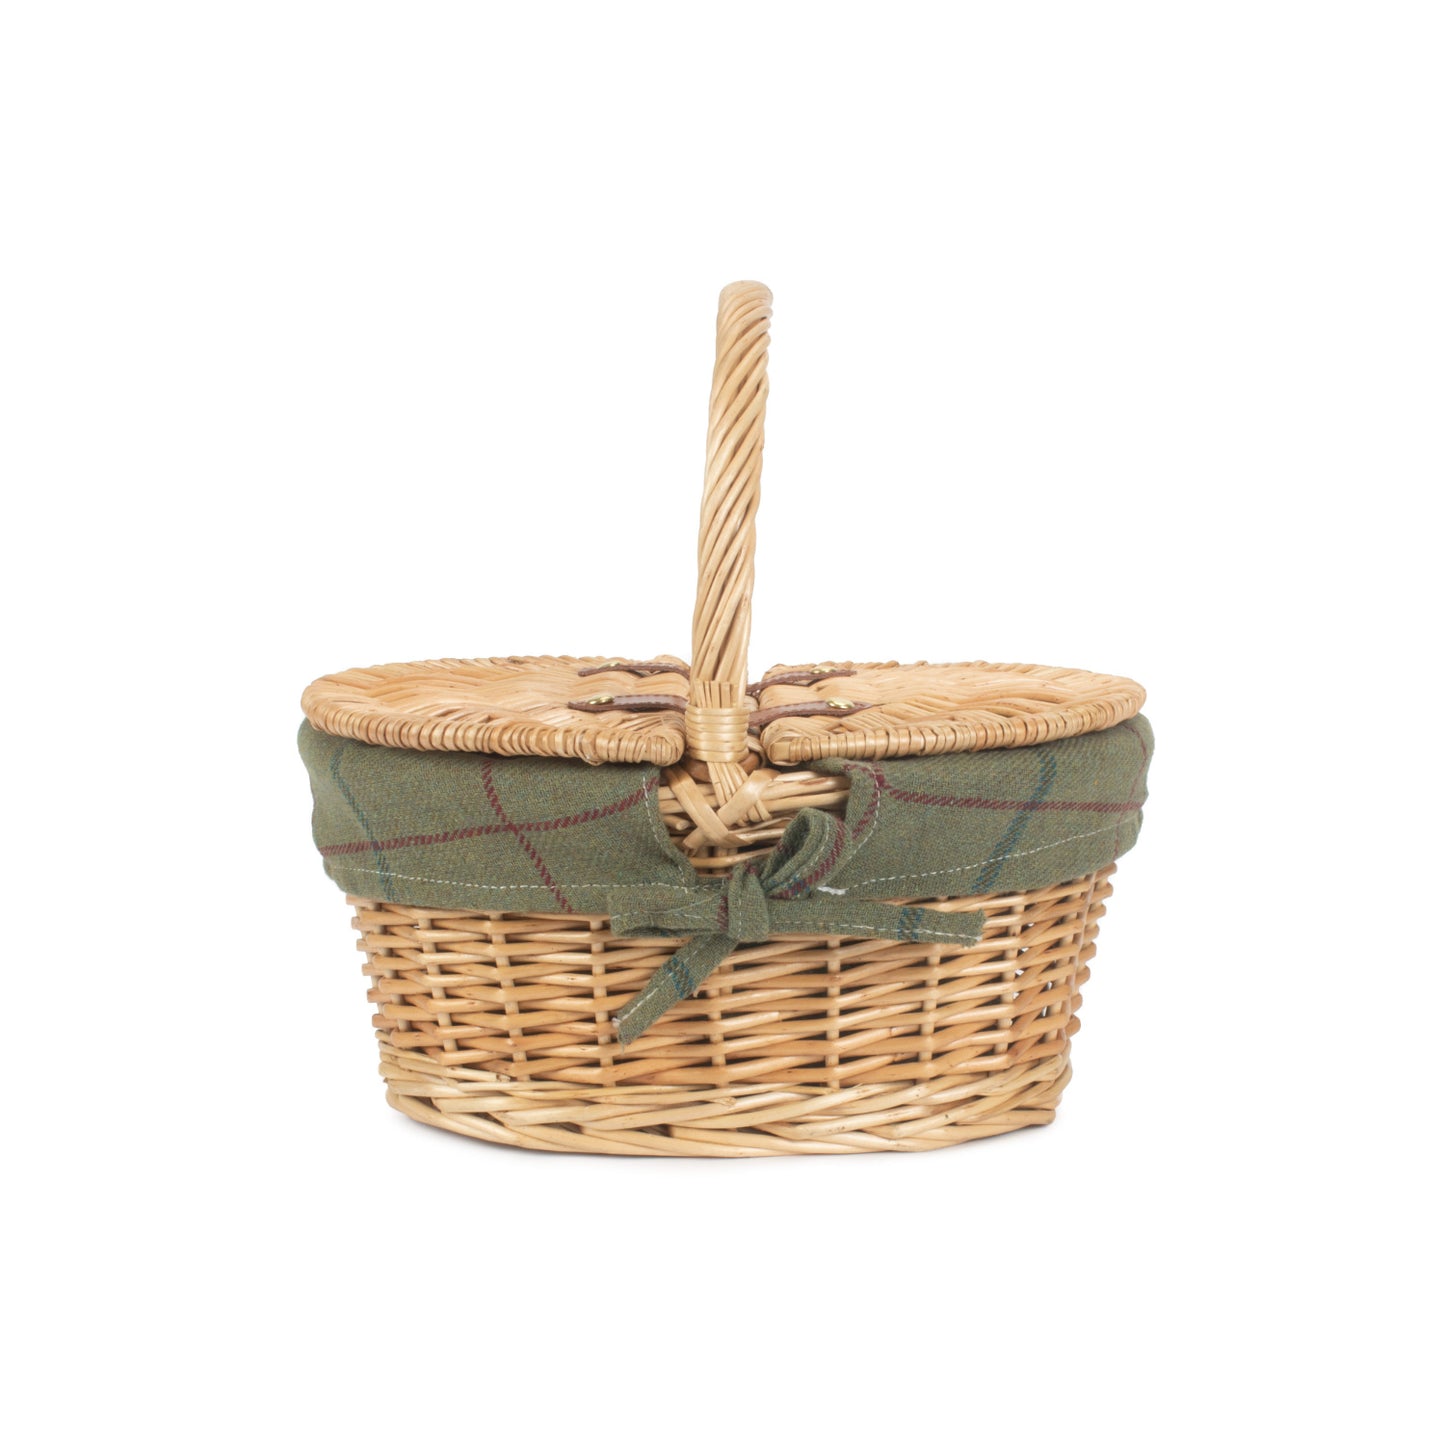 Child's Oval Lined Lidded Hamper With Green Tweed Lining